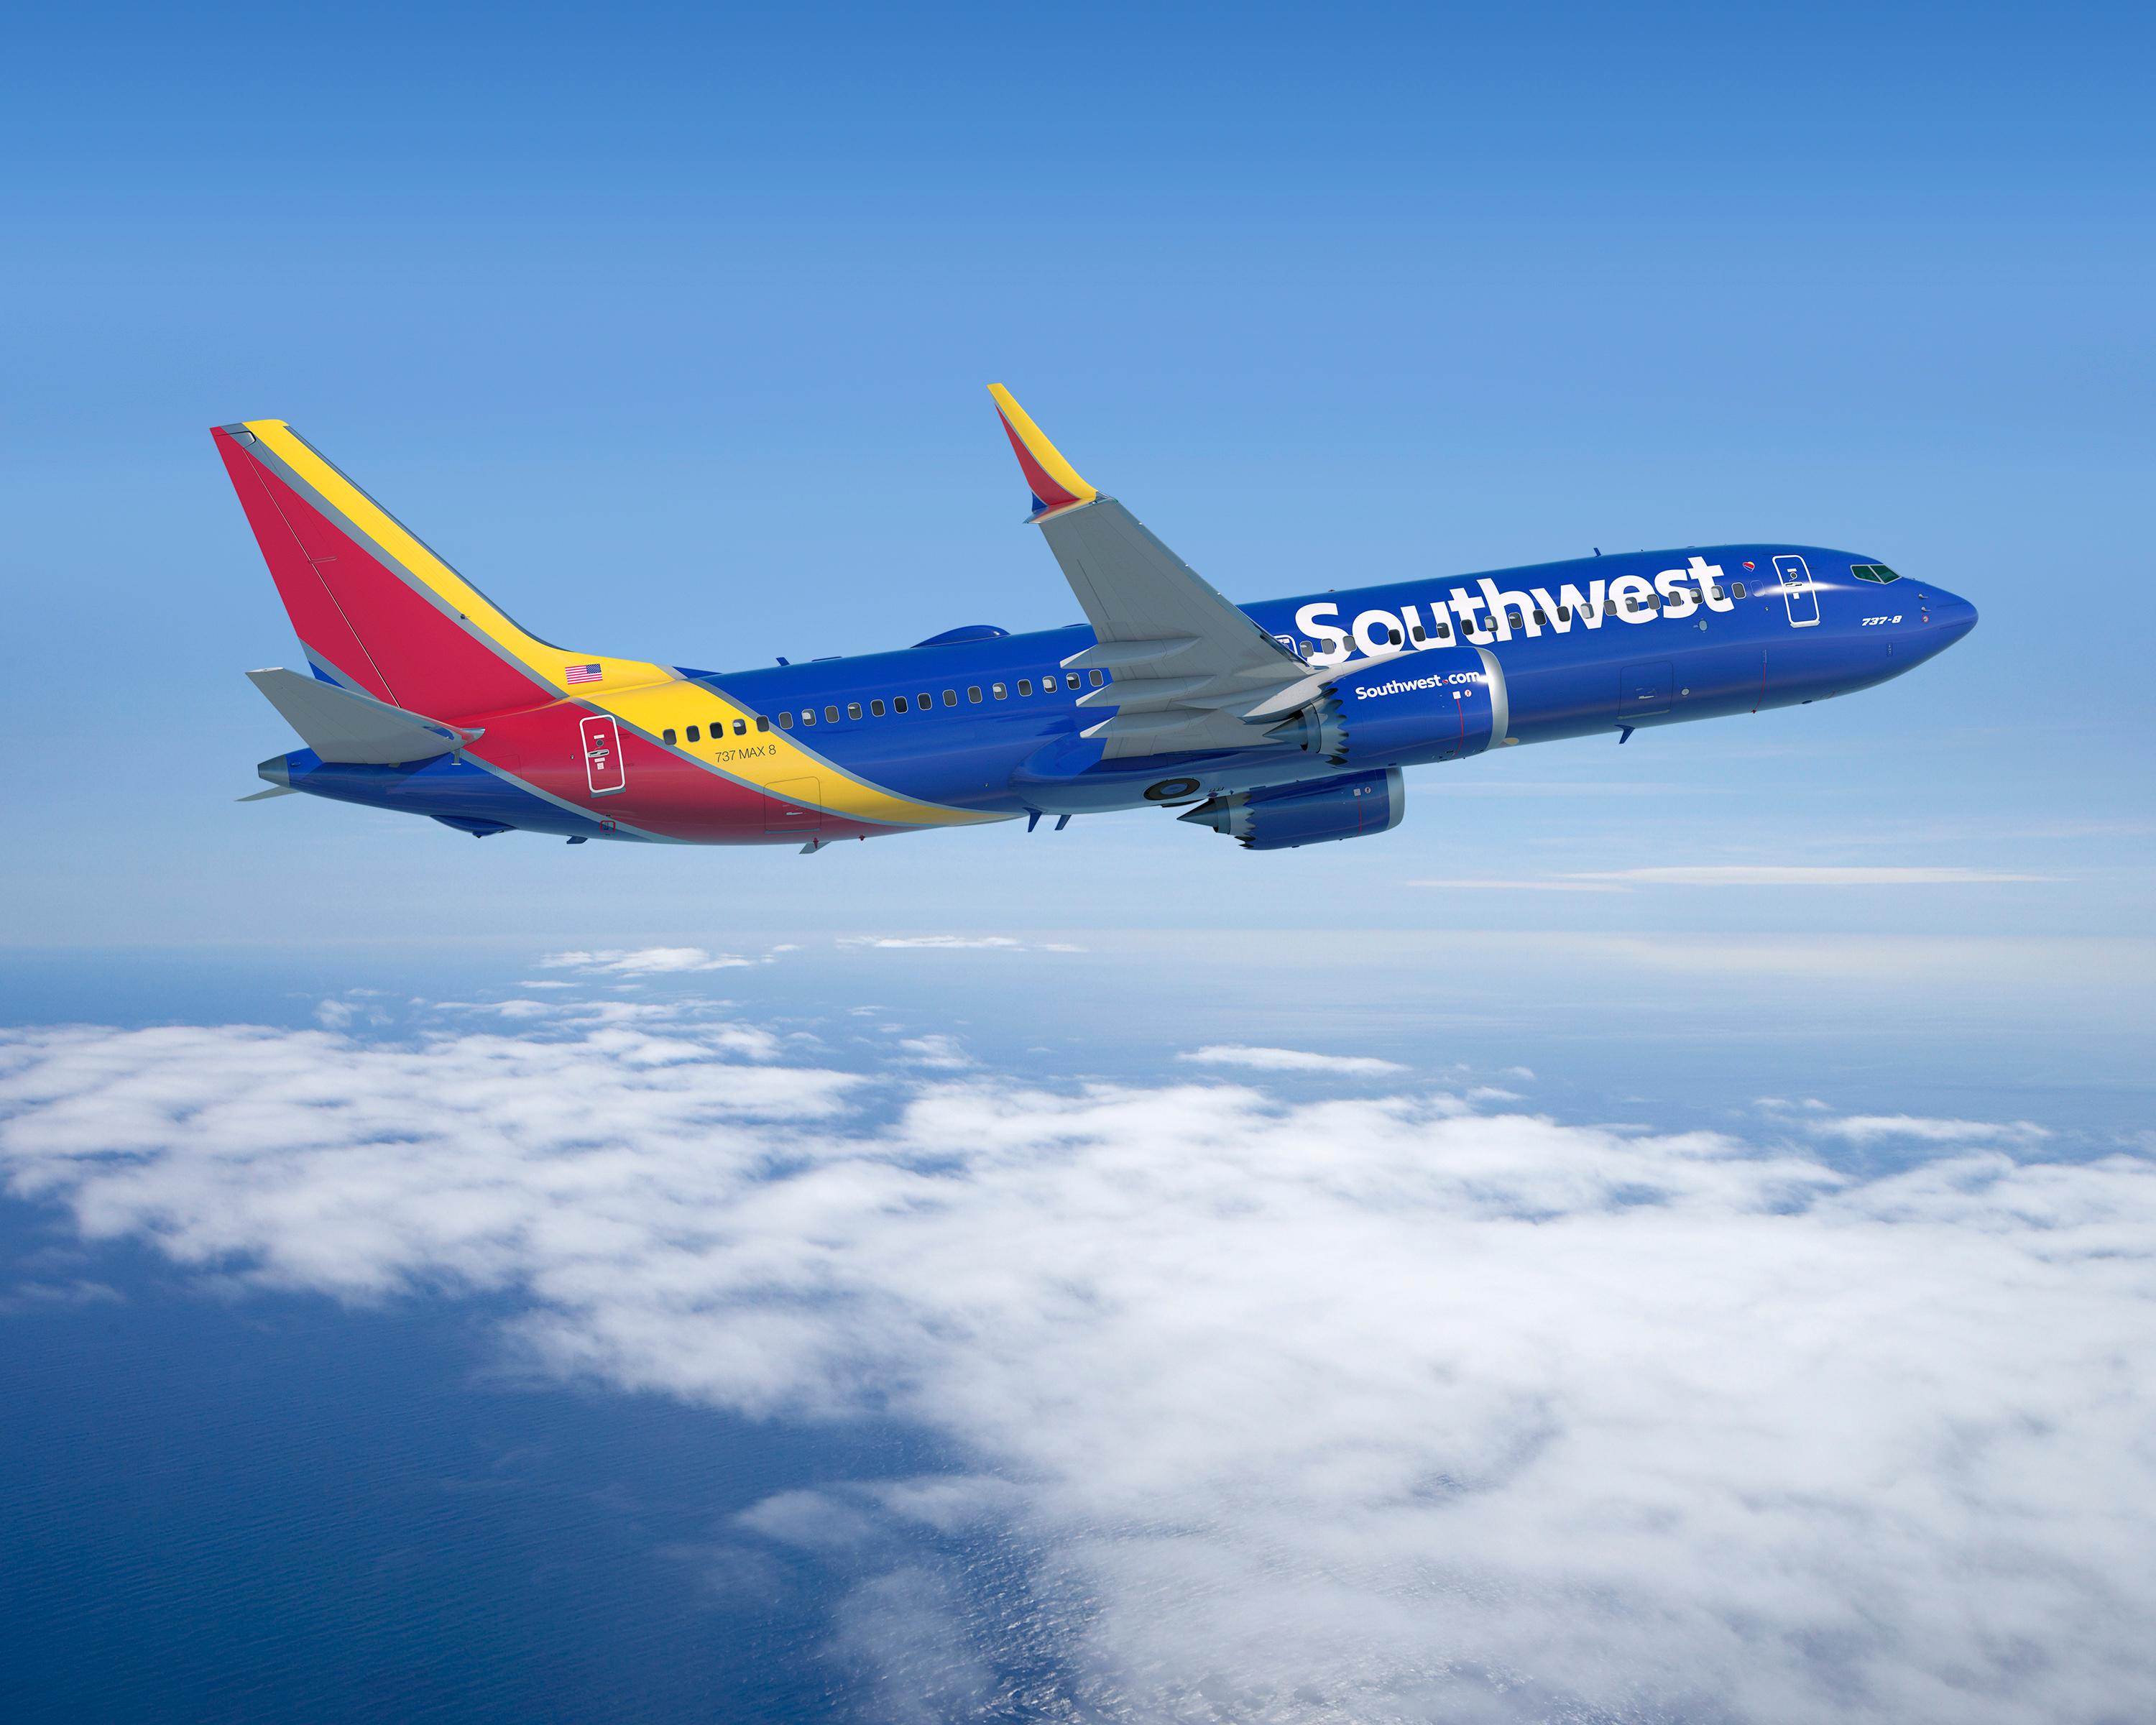 Photo: Southwest Airlines Jet Red Rock Biofuels (courtesy photo)